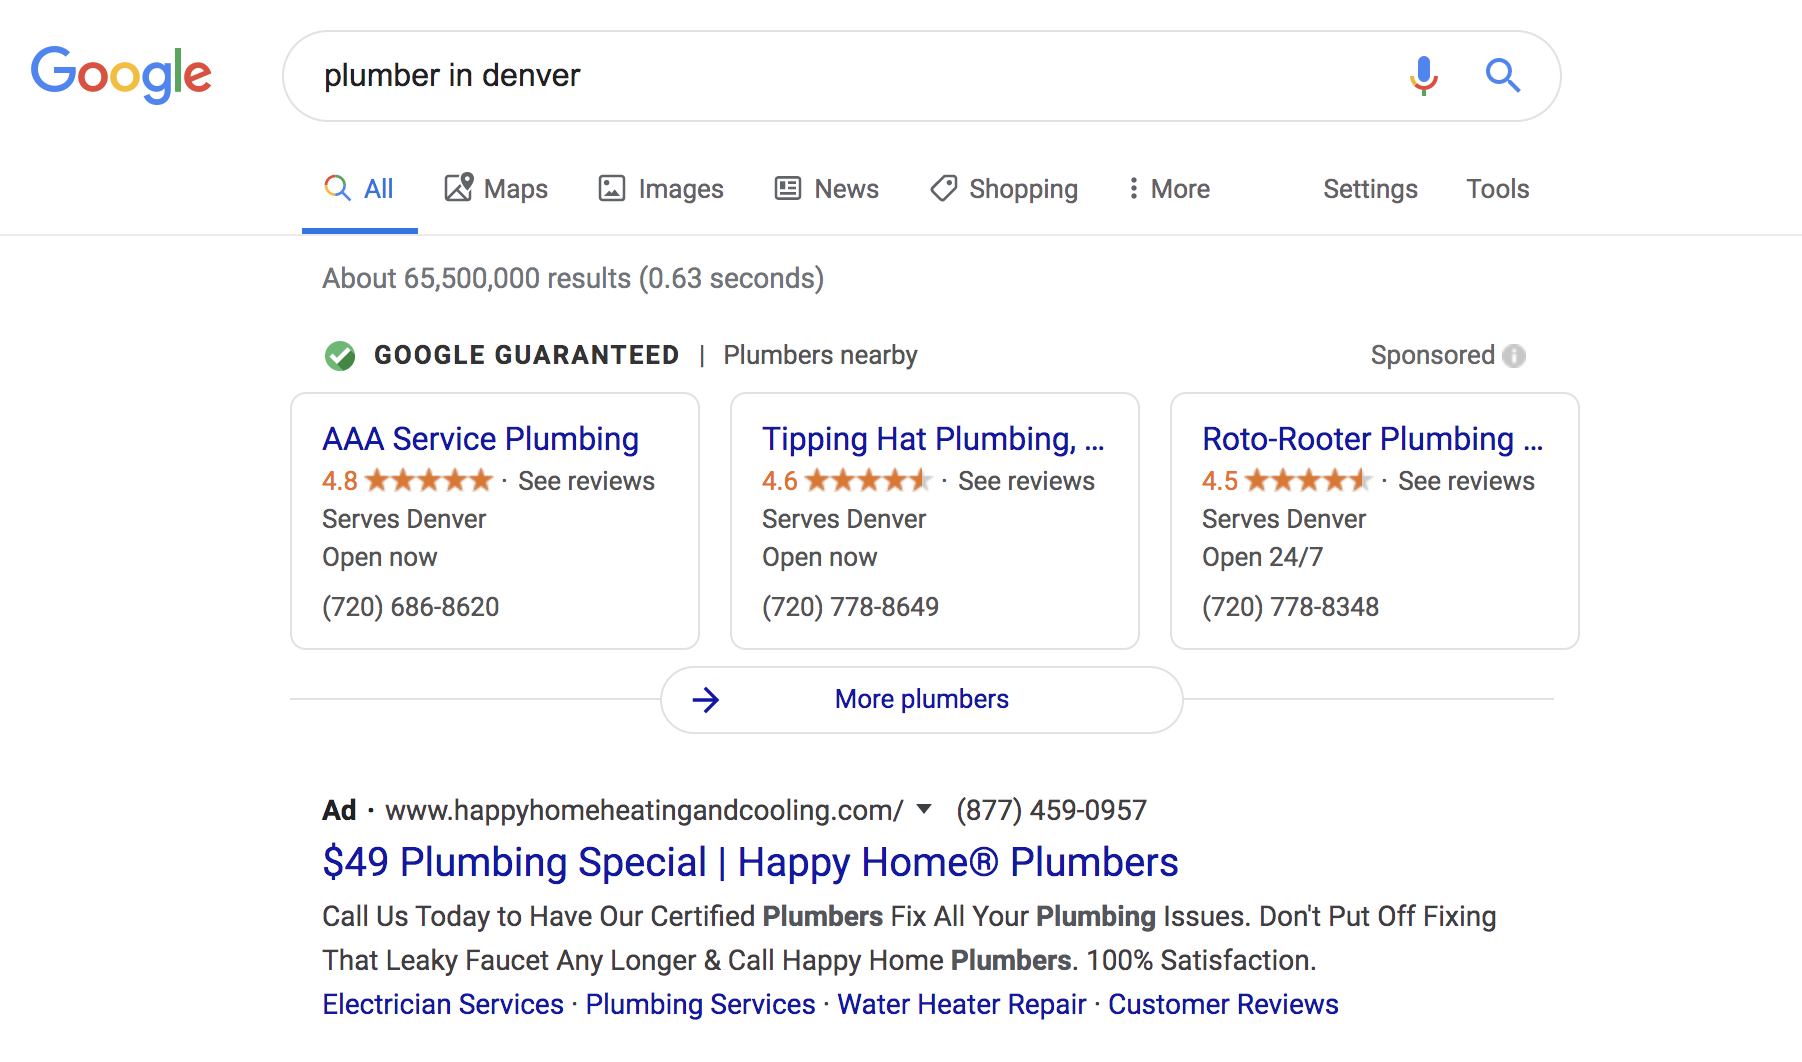 Local Services by Google, Plumber in Denver search Feb 2020